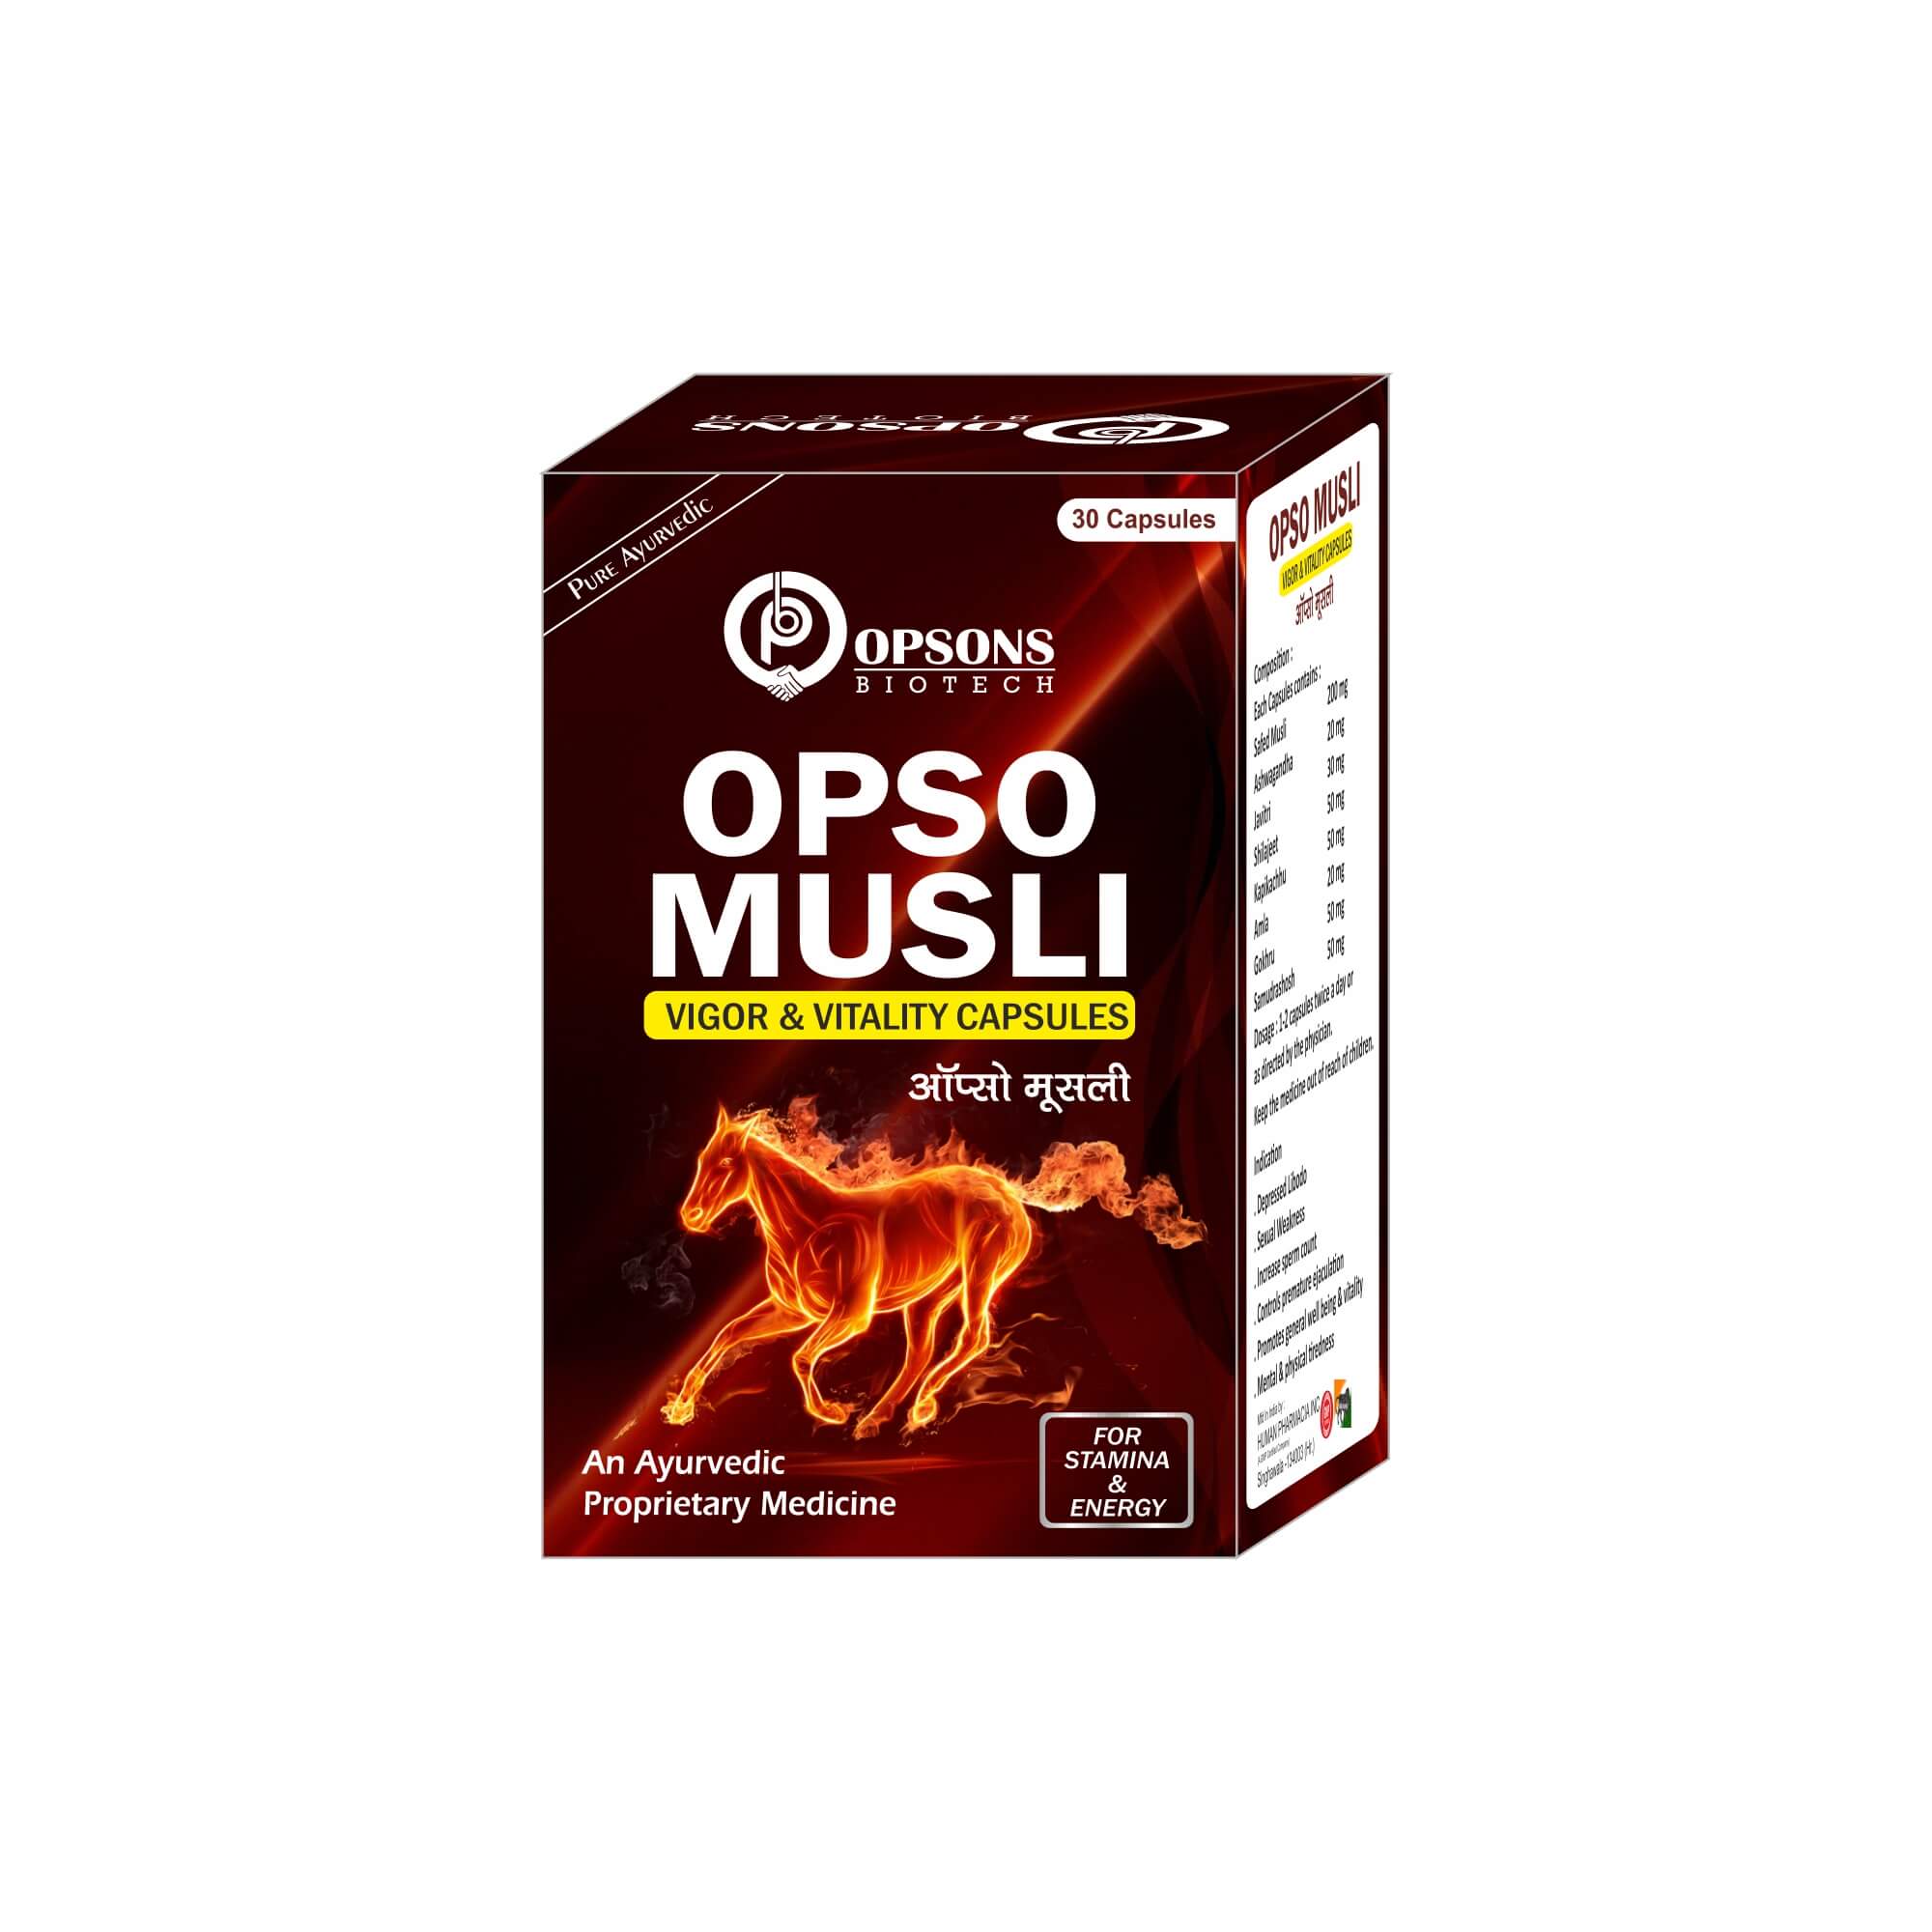 Product Name: Opso mulli capsules, Compositions of Opso mulli capsules are An Ayurvedic Prosperity Medicine - Opsons Biotech